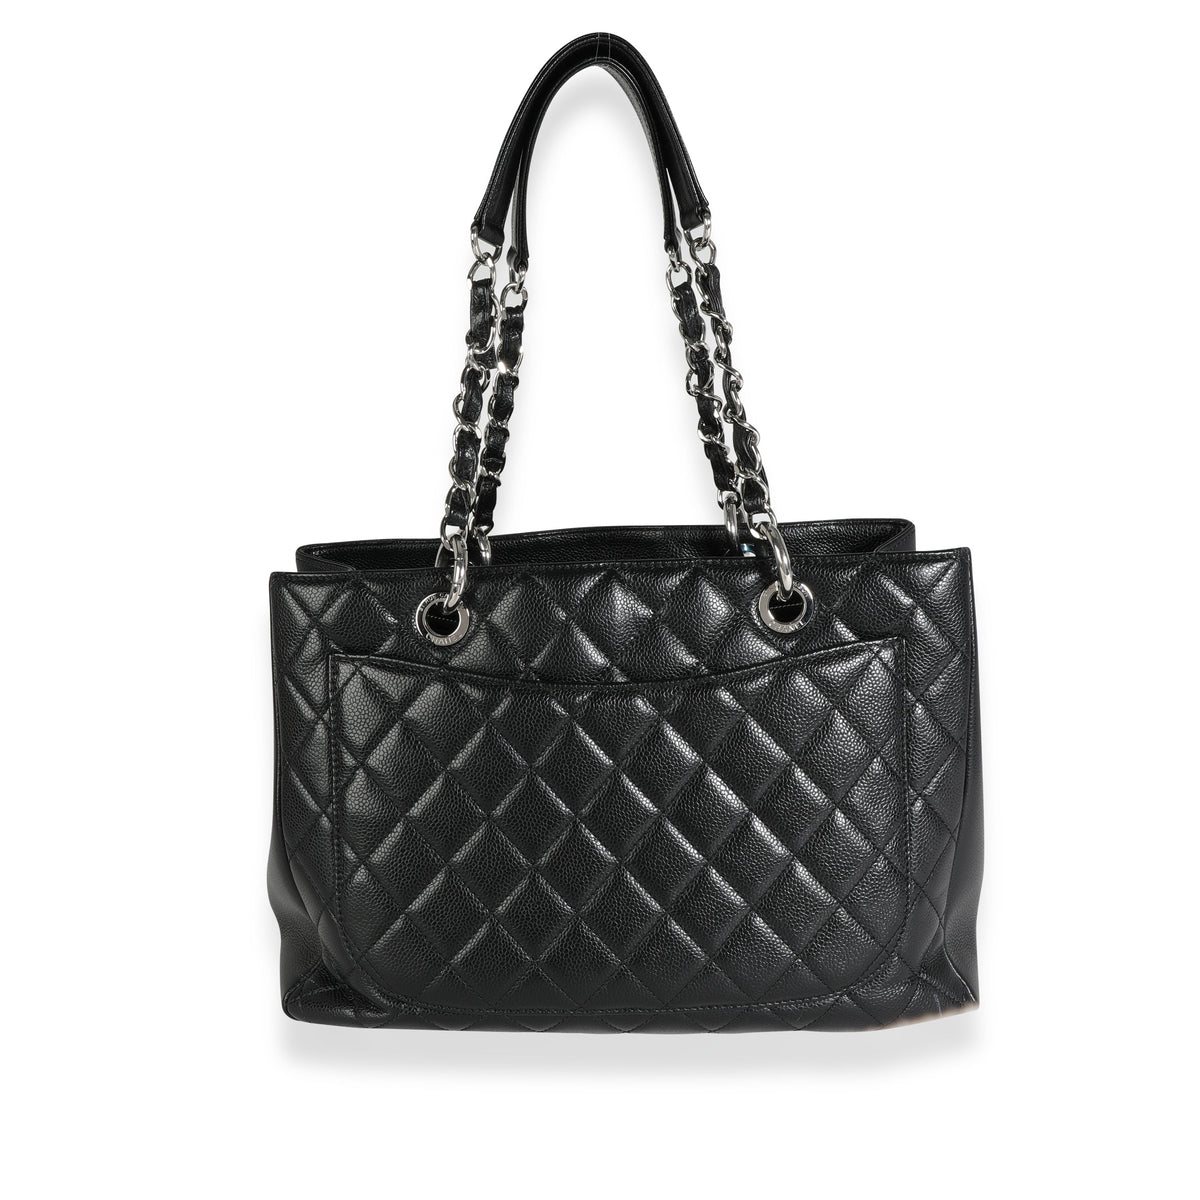 Chanel Black Quilted Aged Calfskin Reissue Shopping Tote, myGemma, SG